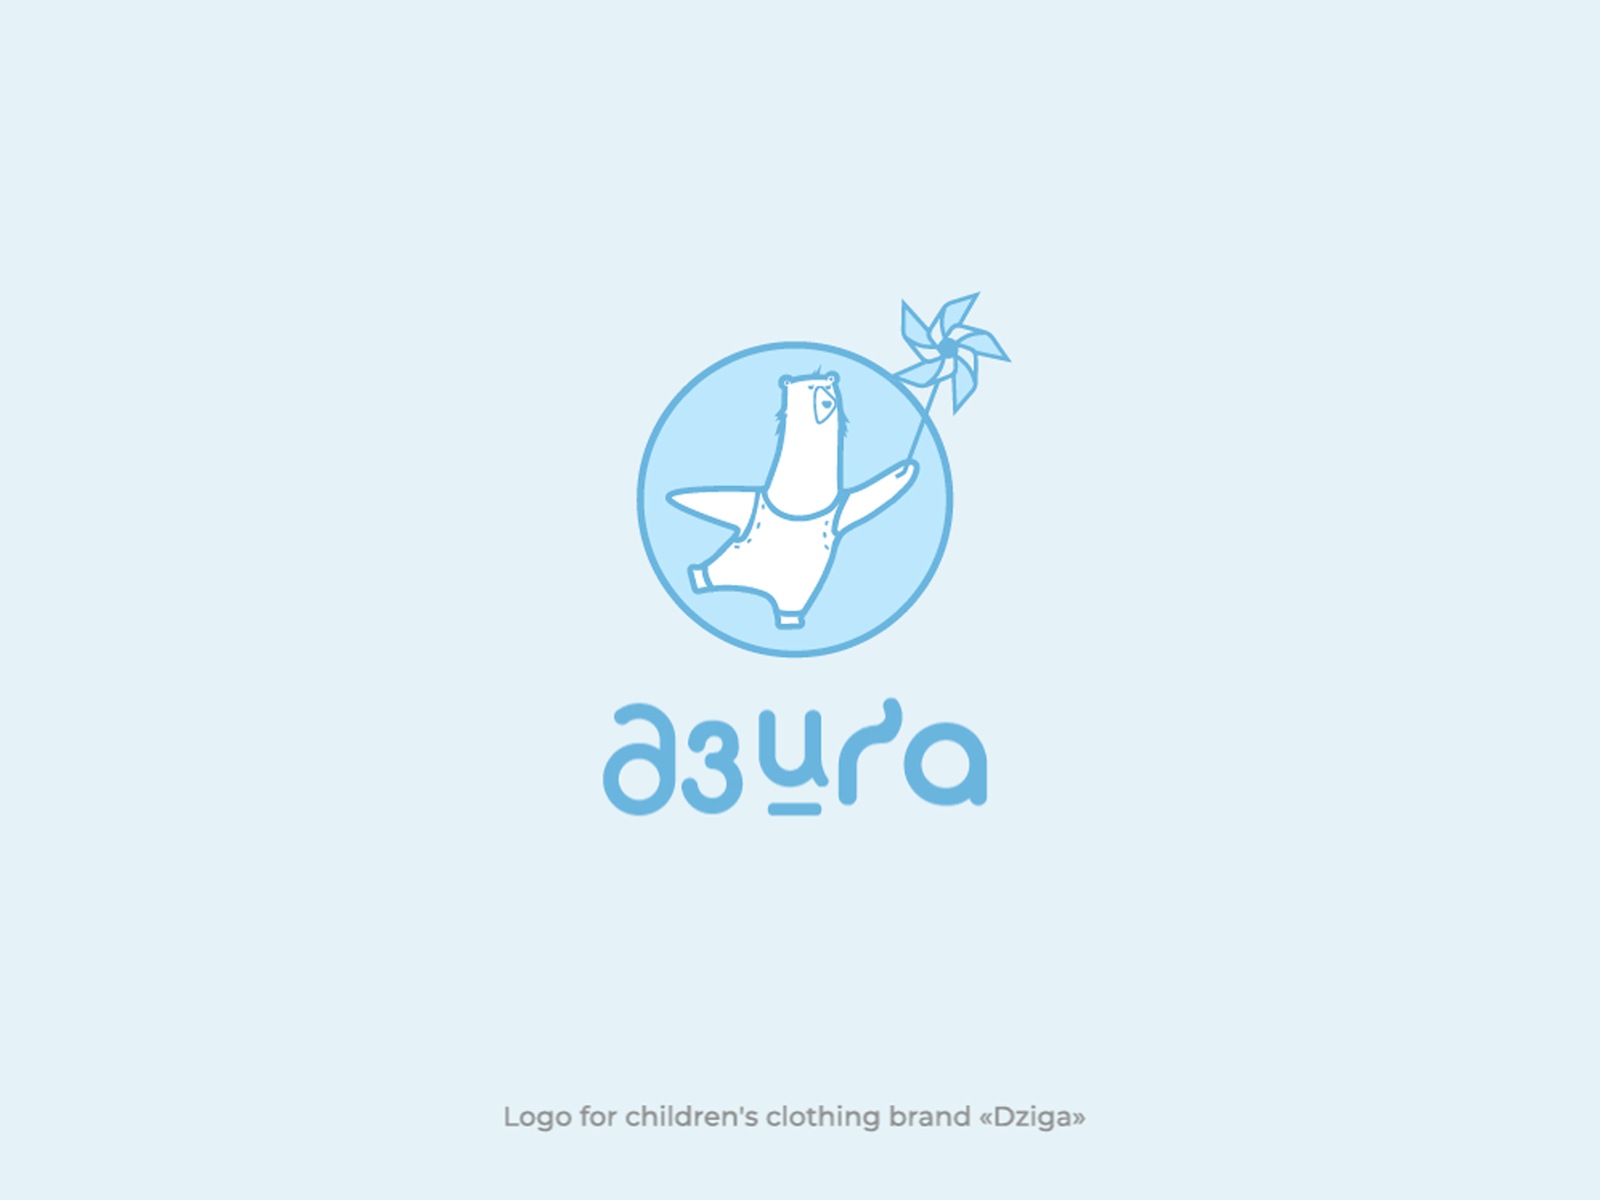 Logo for children's clothing brand "Dziga" art baby clothes branding character clothes font design graphic design identity illustration logo logotype type vector